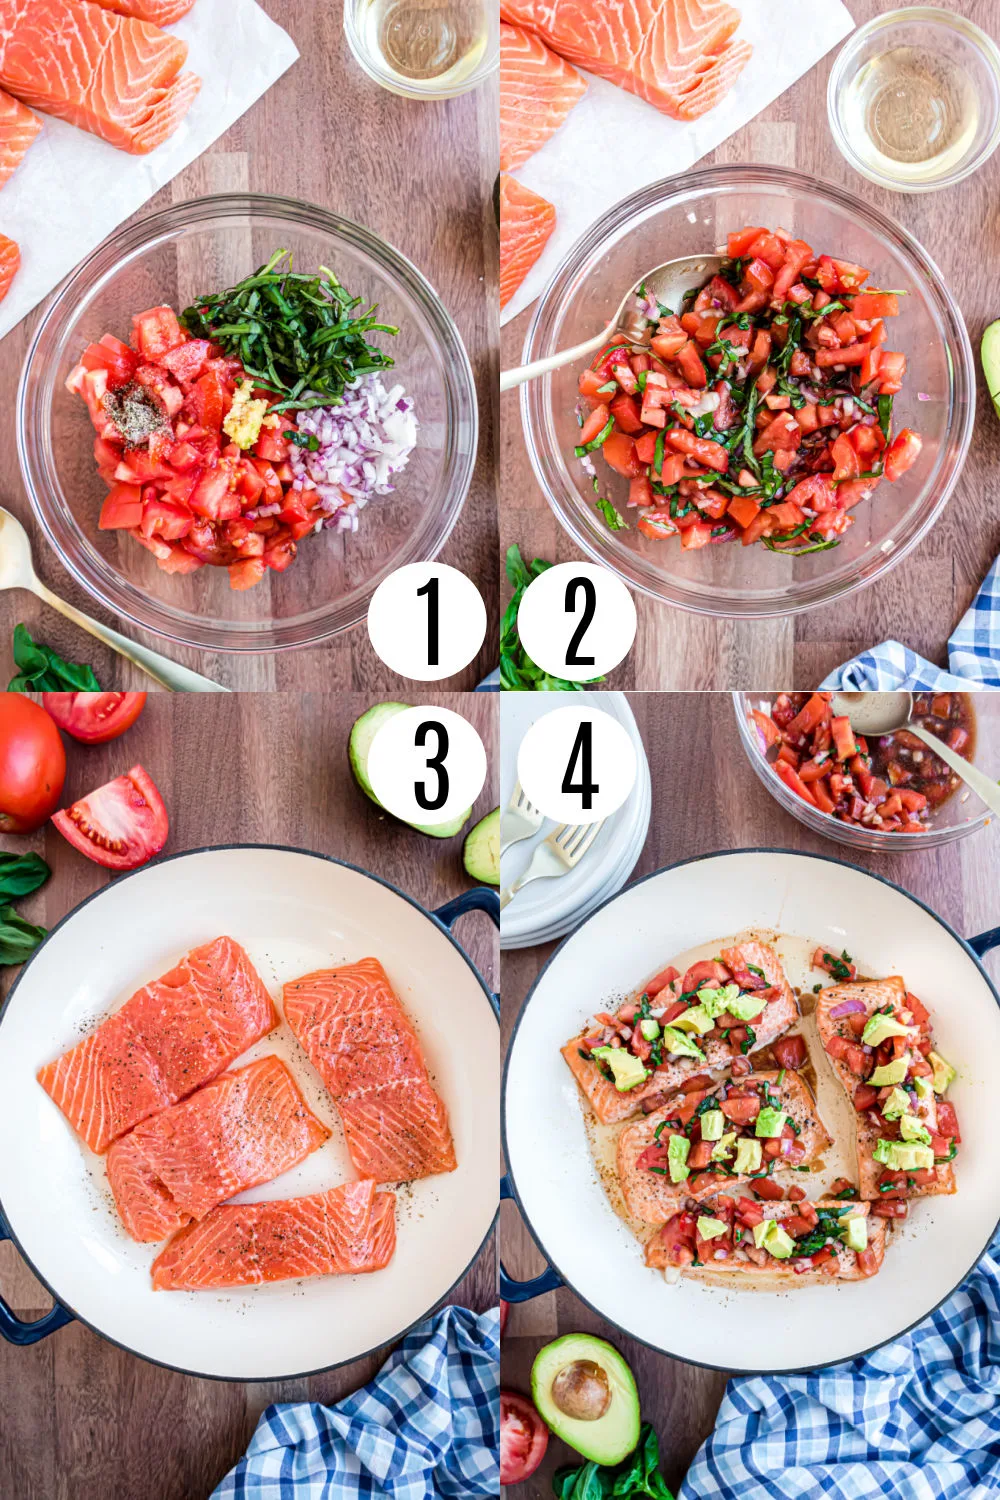 Step by step photos showing how to make bruschetta salmon.